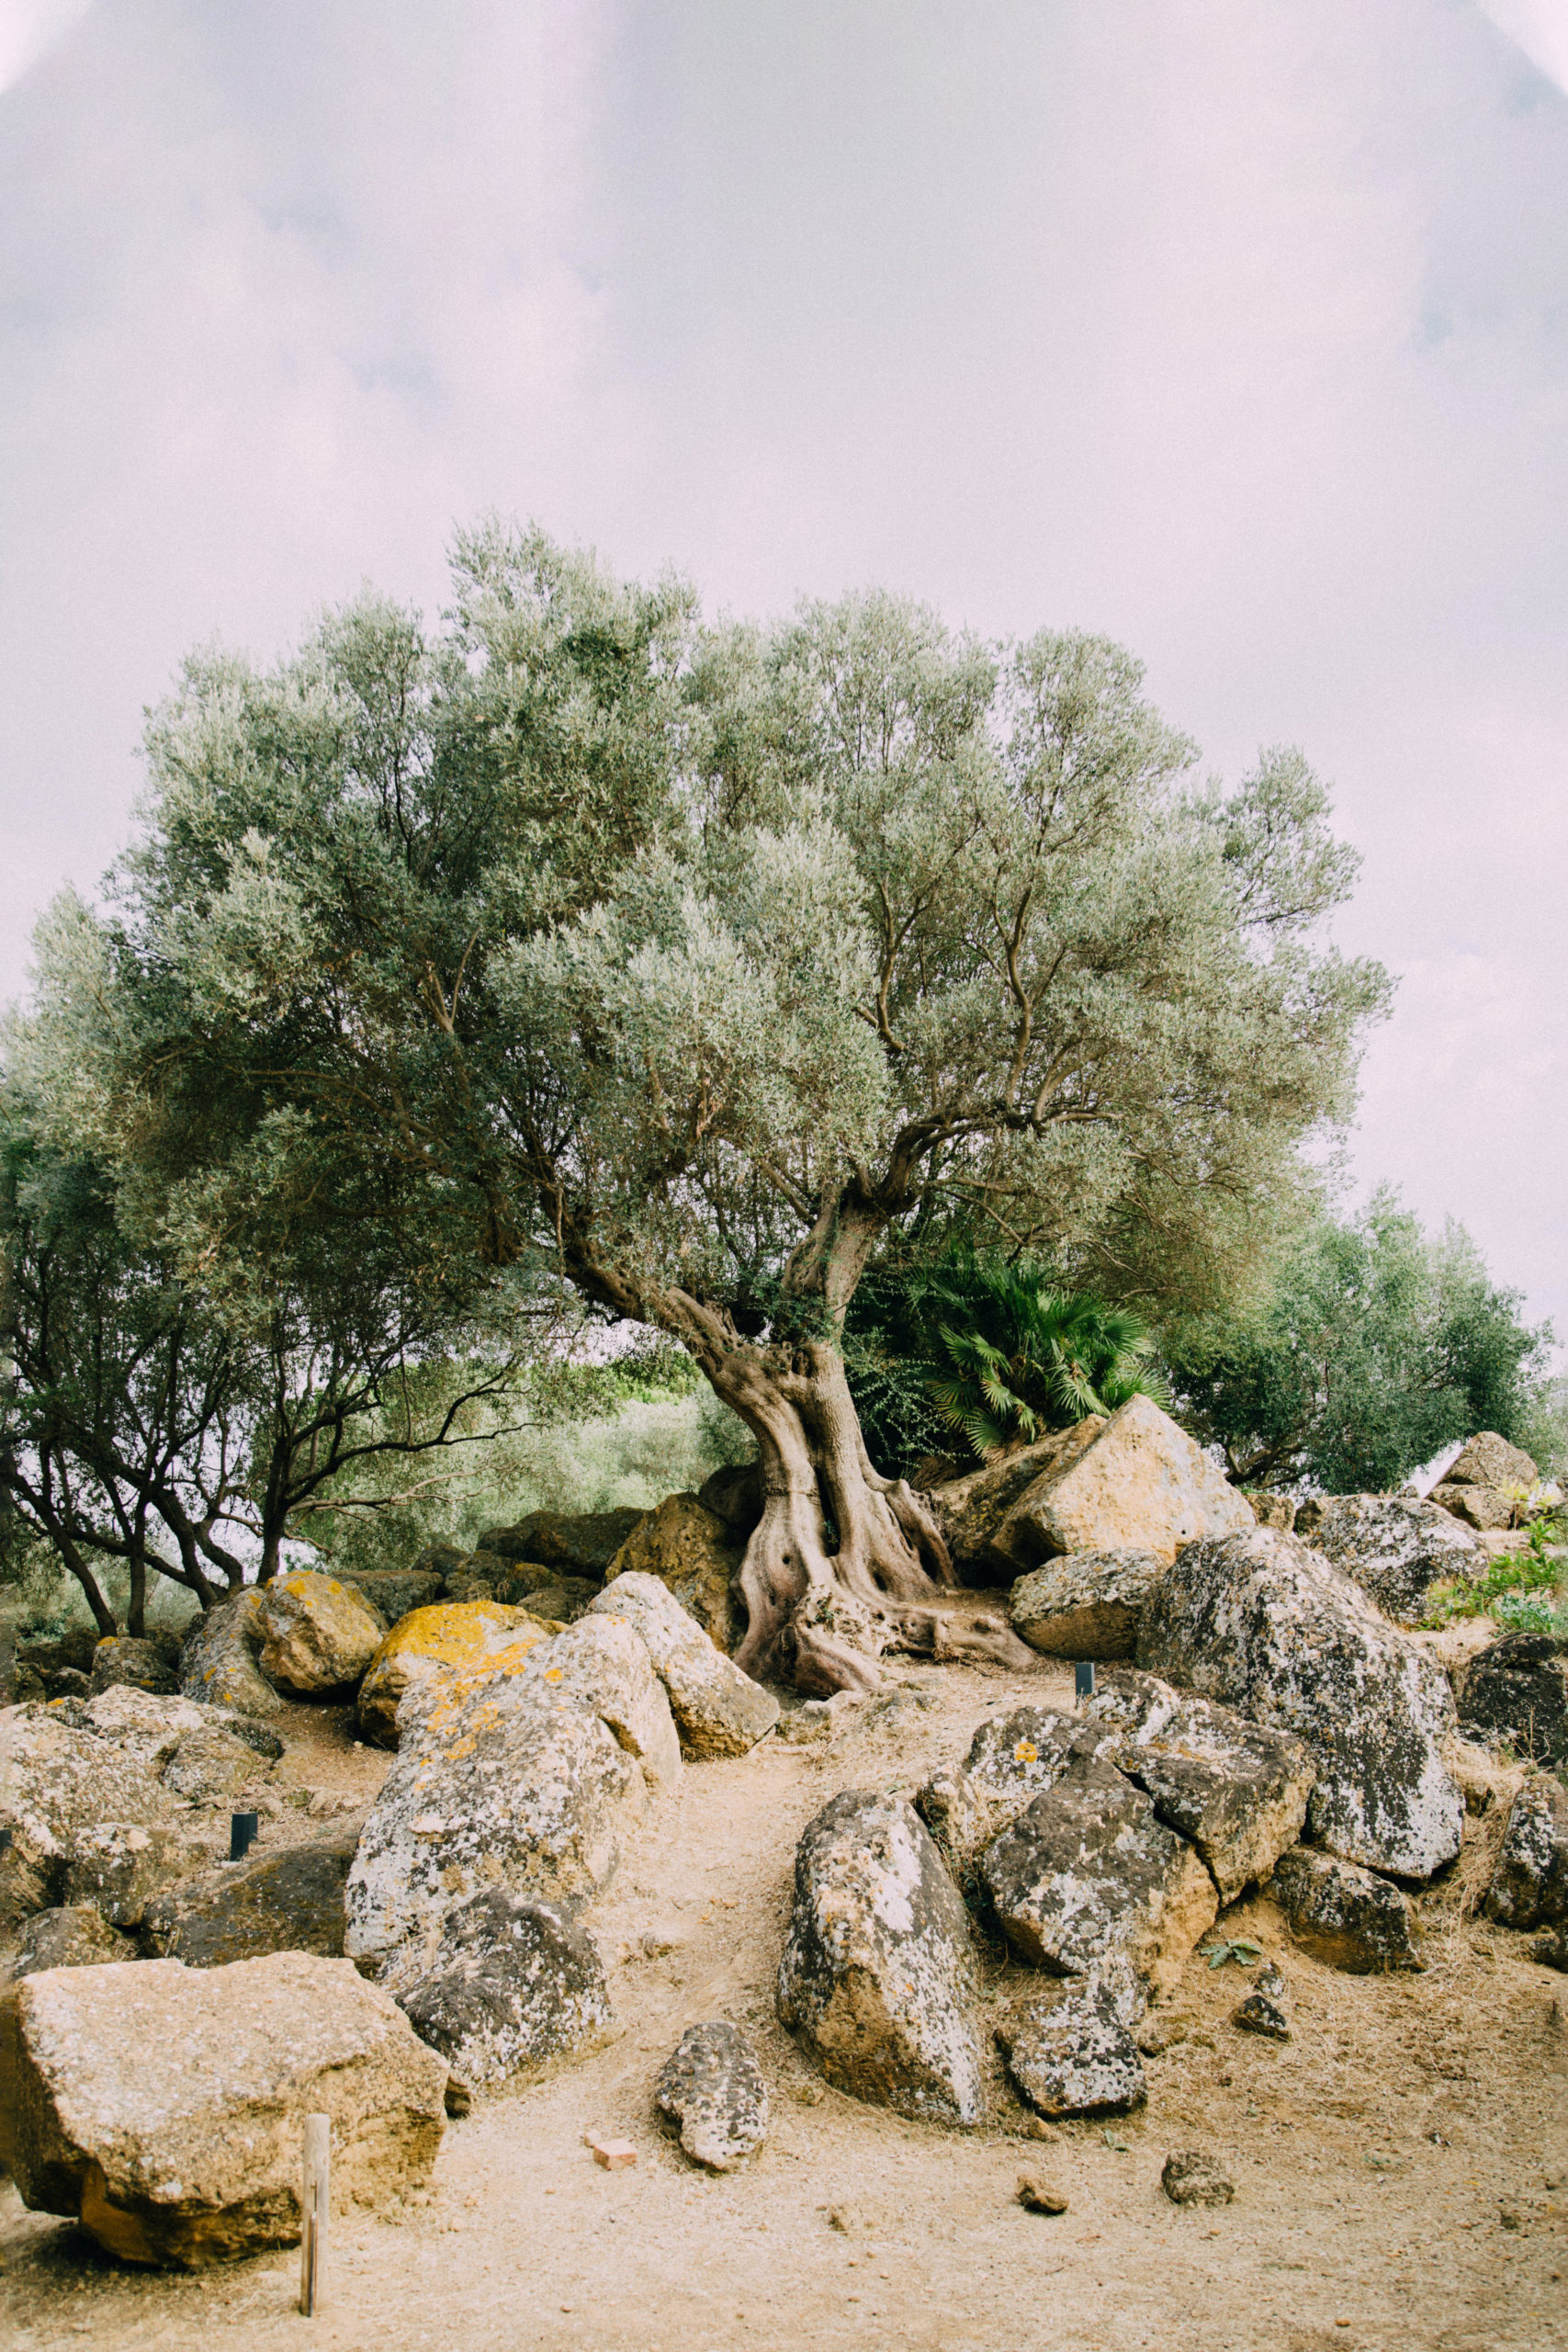 19: The Allegory of the Olive Tree and the Saving Power of Wild Things